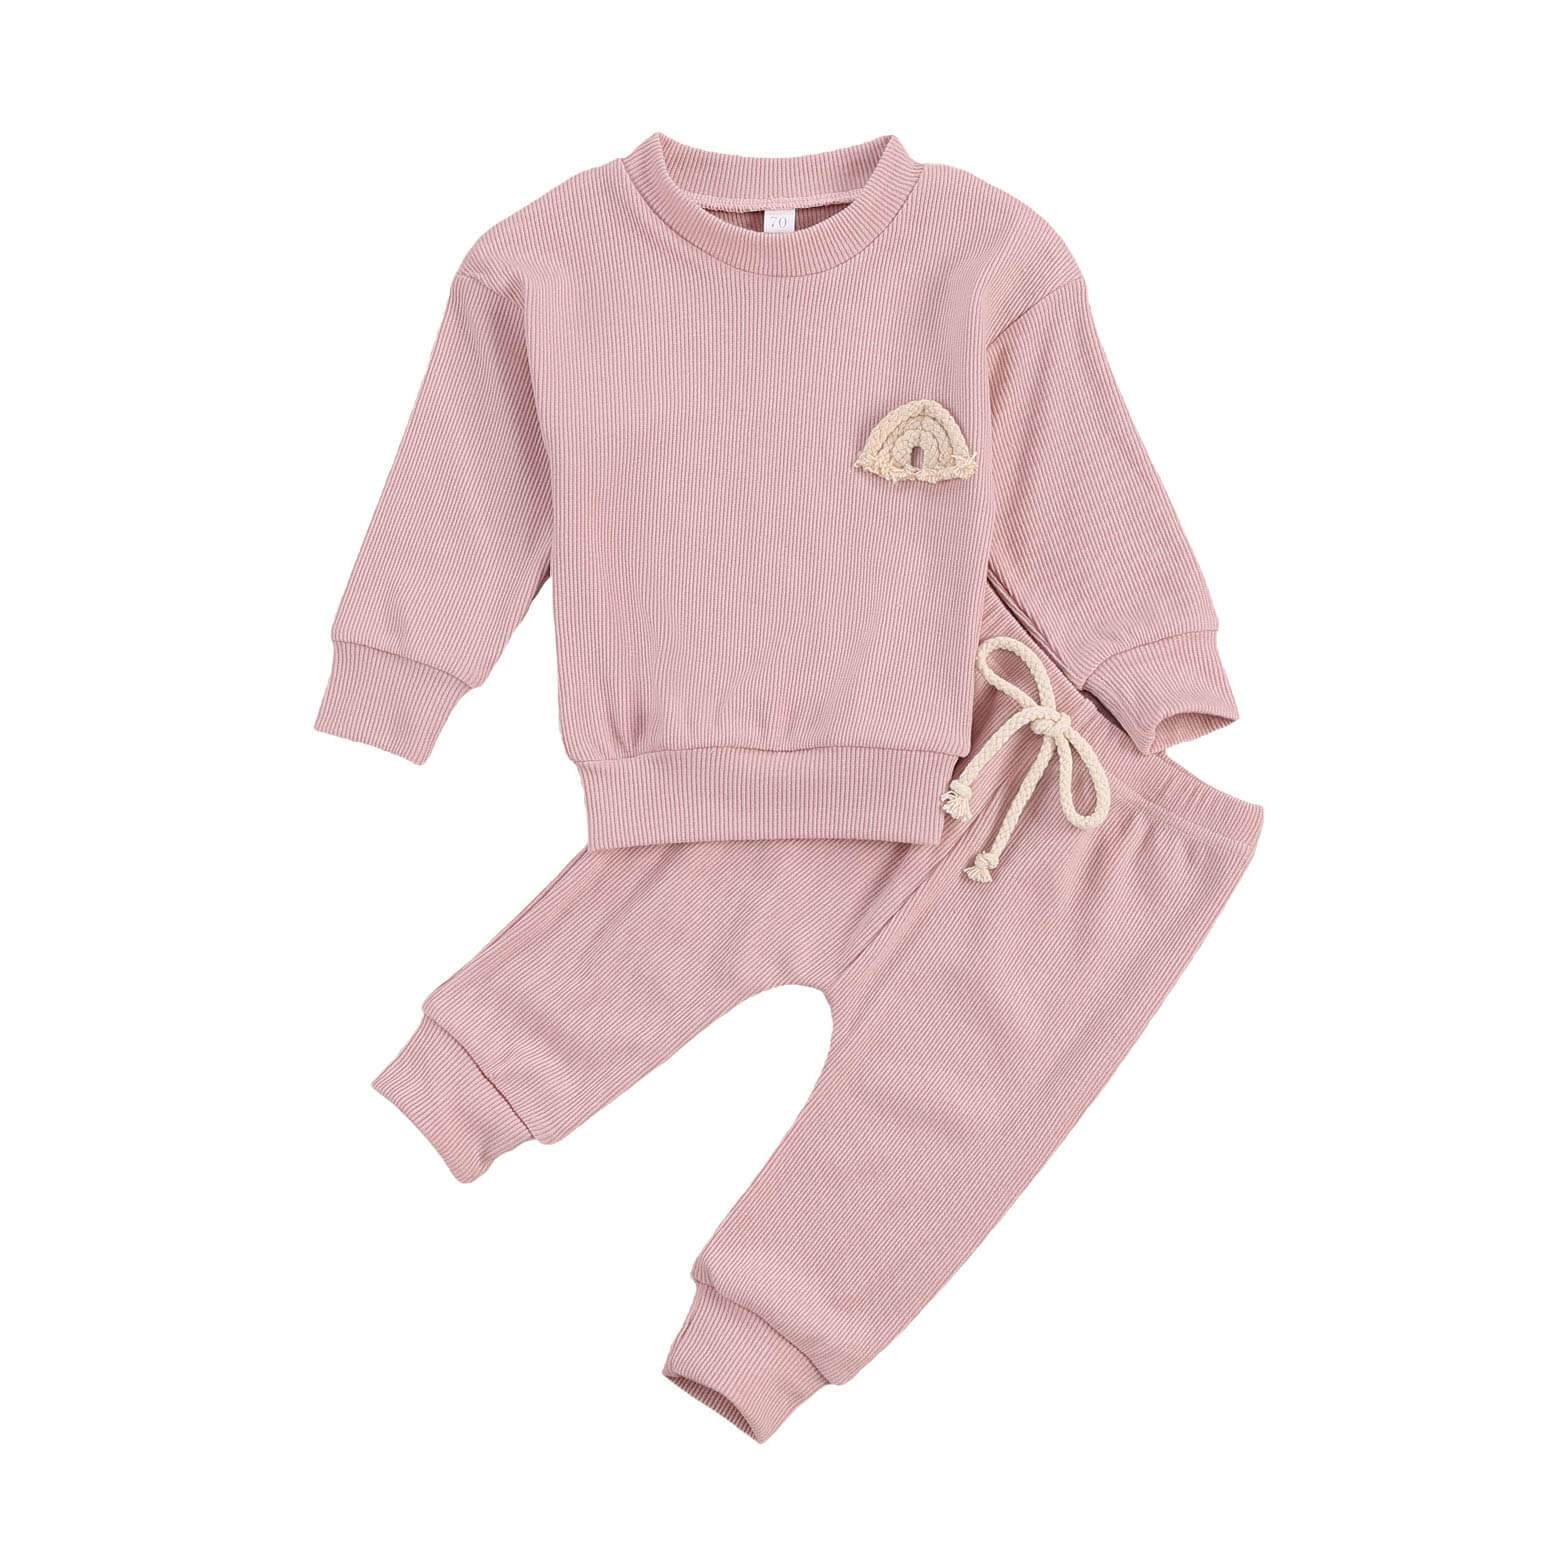 Unisex Baby Rainbow Solid 2-Piece Outfit Set – The Trendy Toddlers